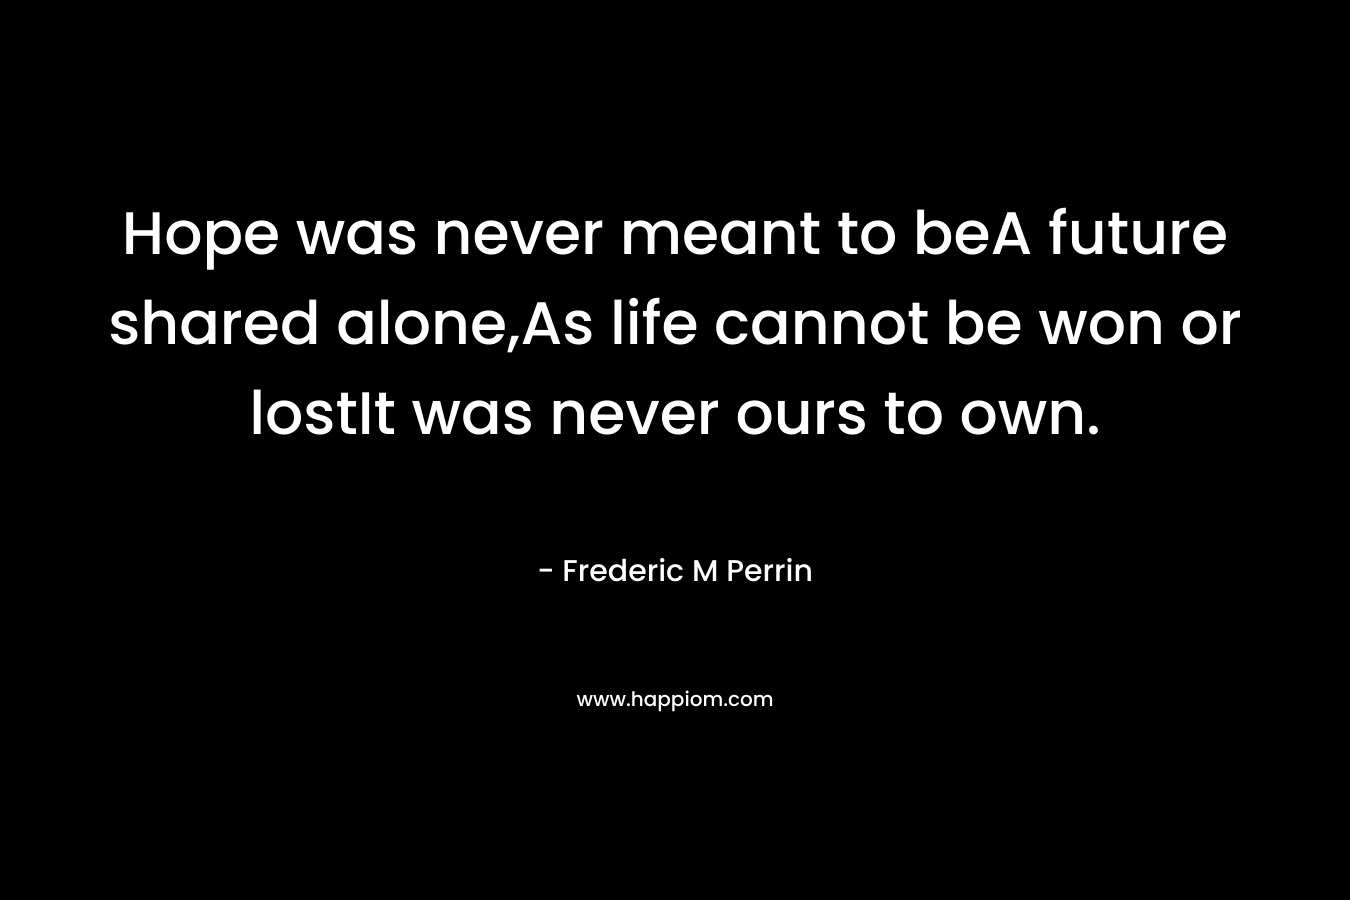 Hope was never meant to beA future shared alone,As life cannot be won or lostIt was never ours to own. – Frederic M Perrin